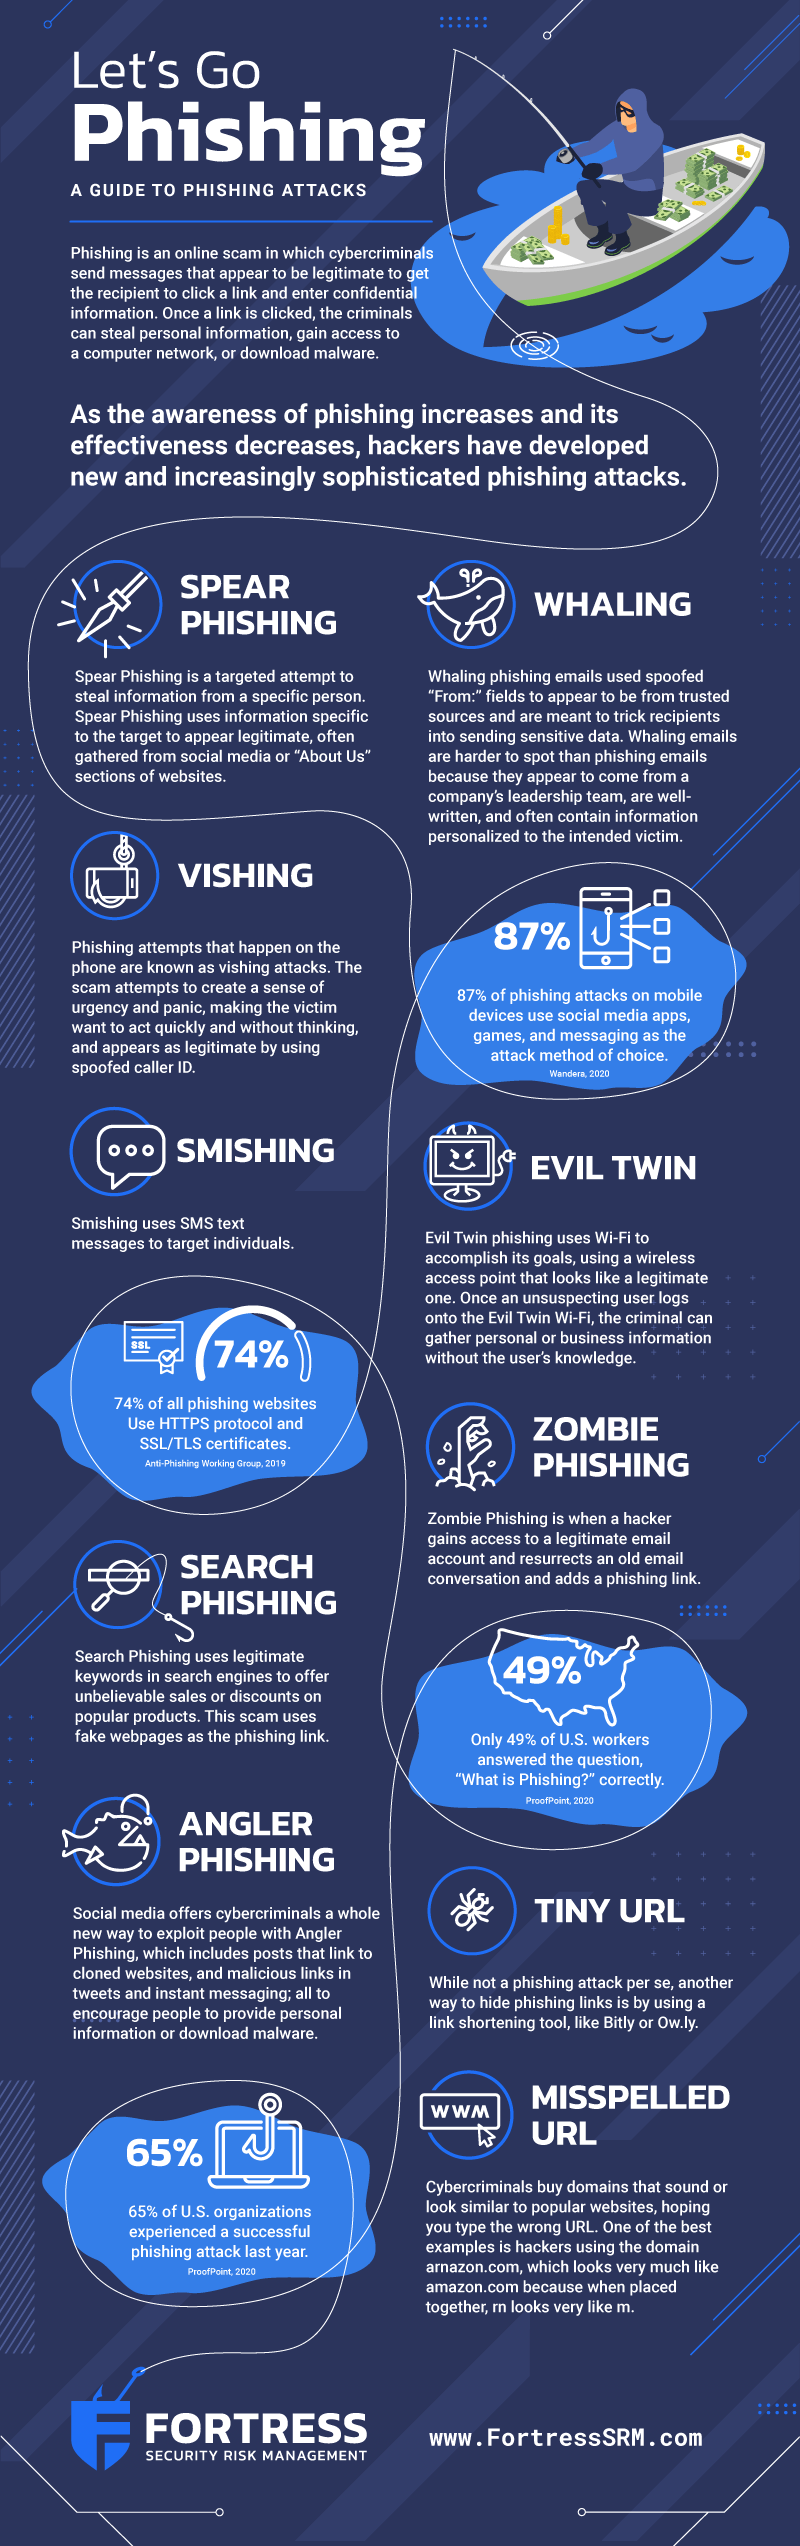 Let's Go Phishing! A Guide to Phishing Attacks Infographic